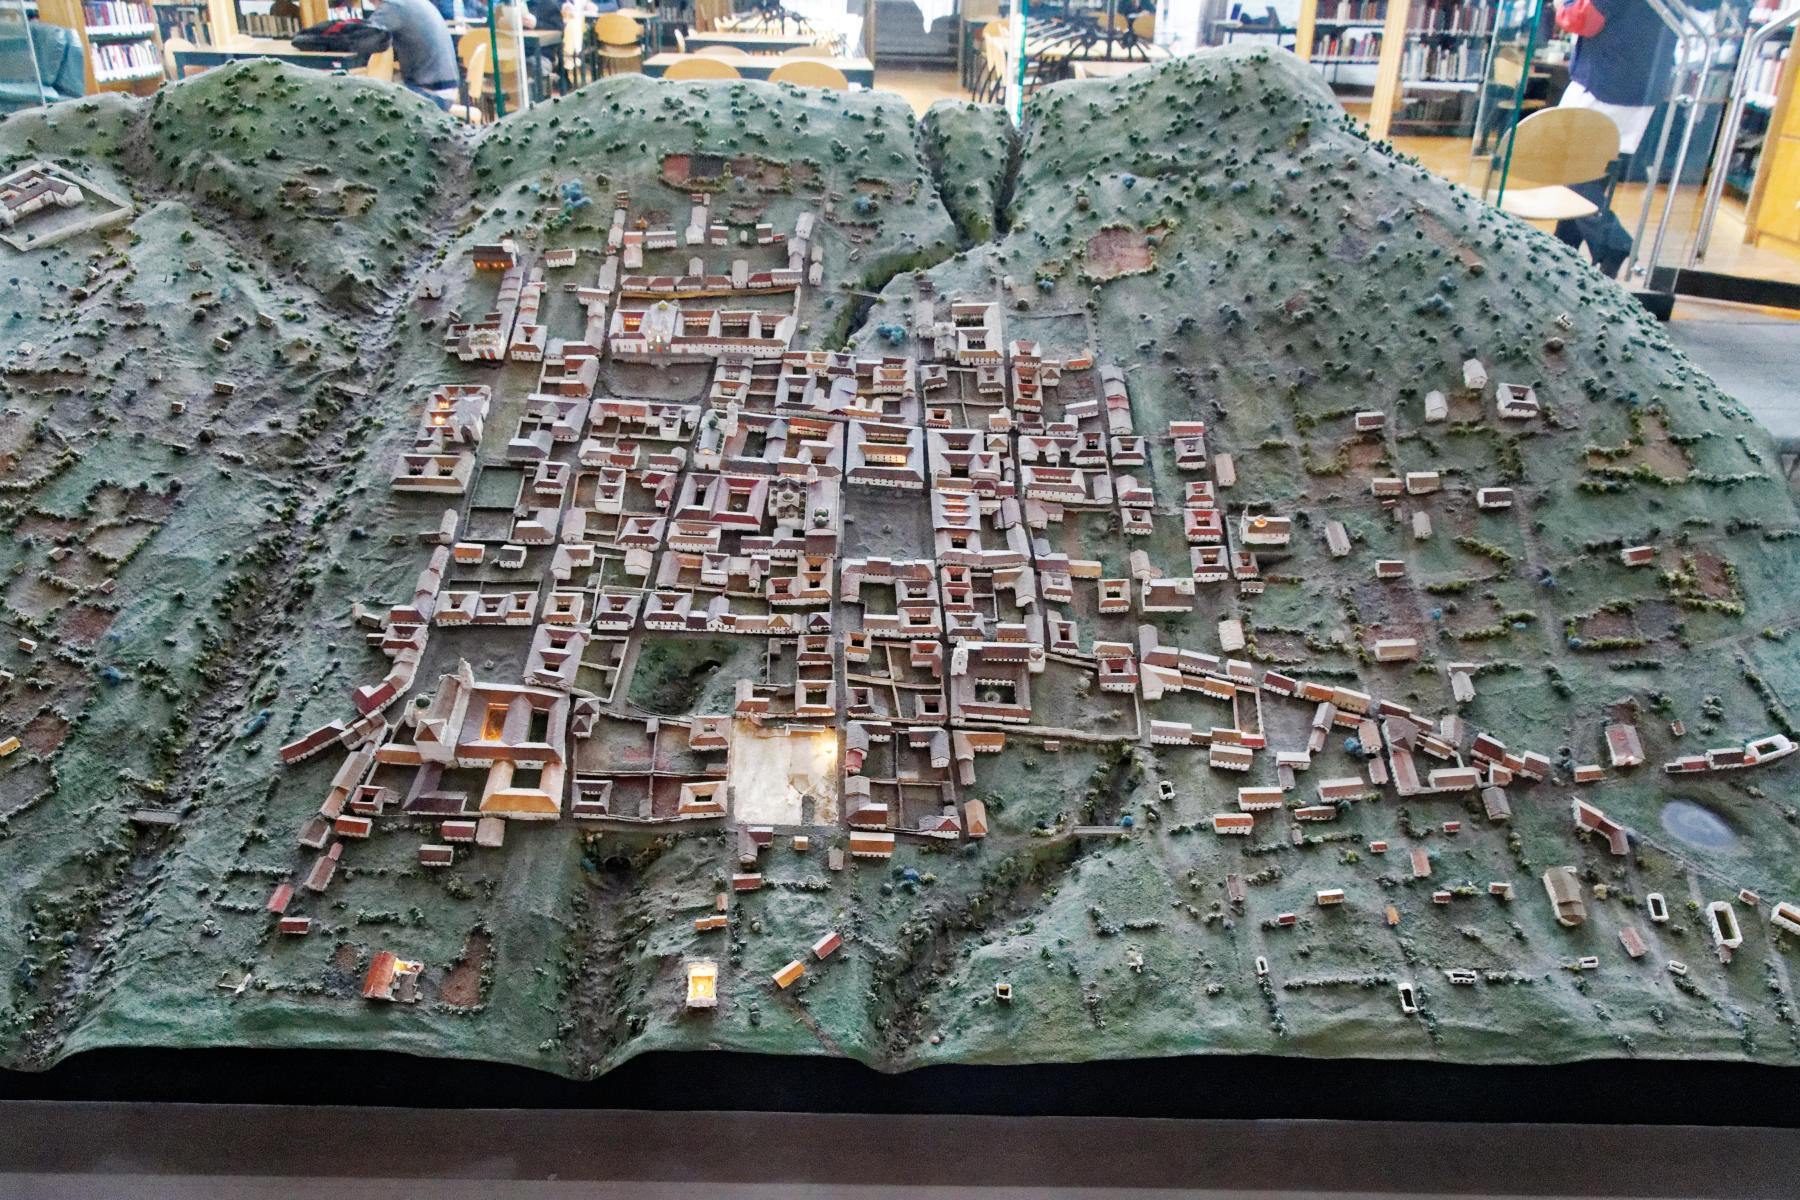 Model of Quito city in the Library